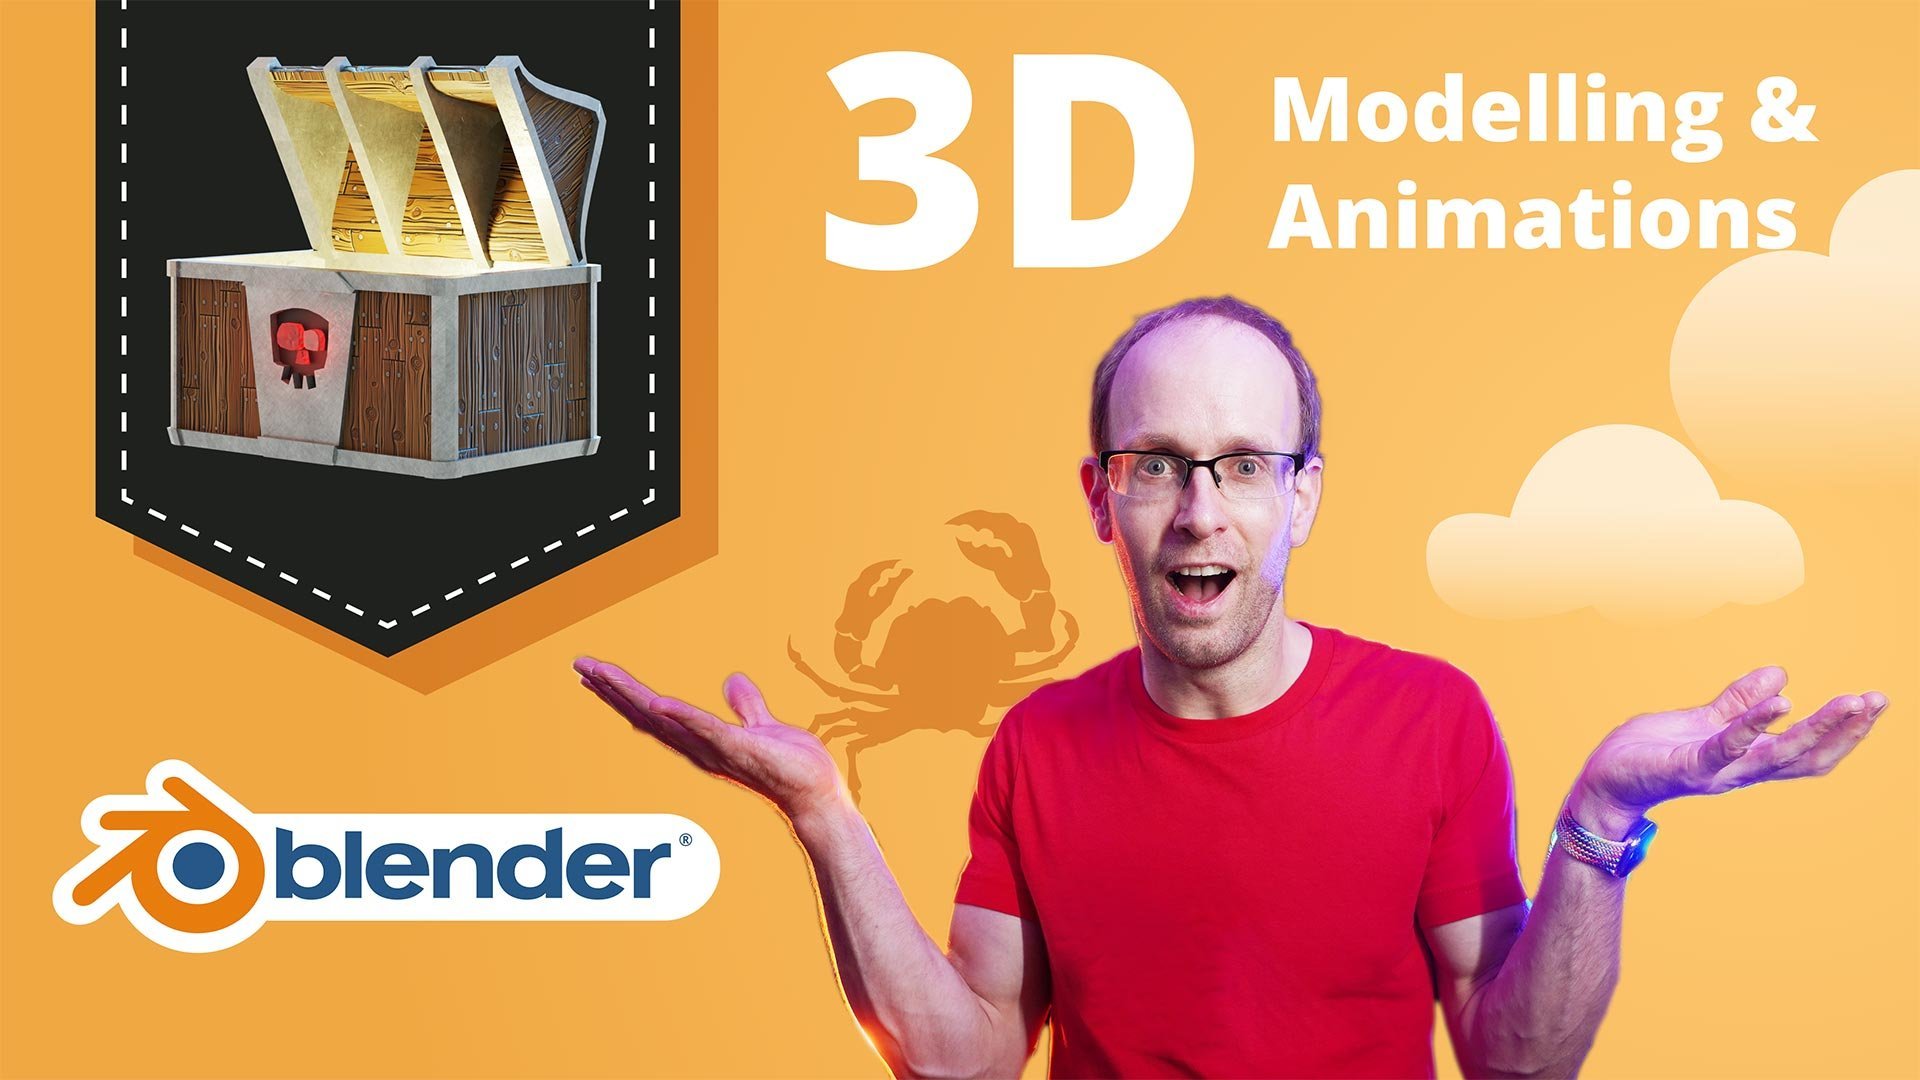 3D Modelling & Animations in Blender for Absolute Beginners